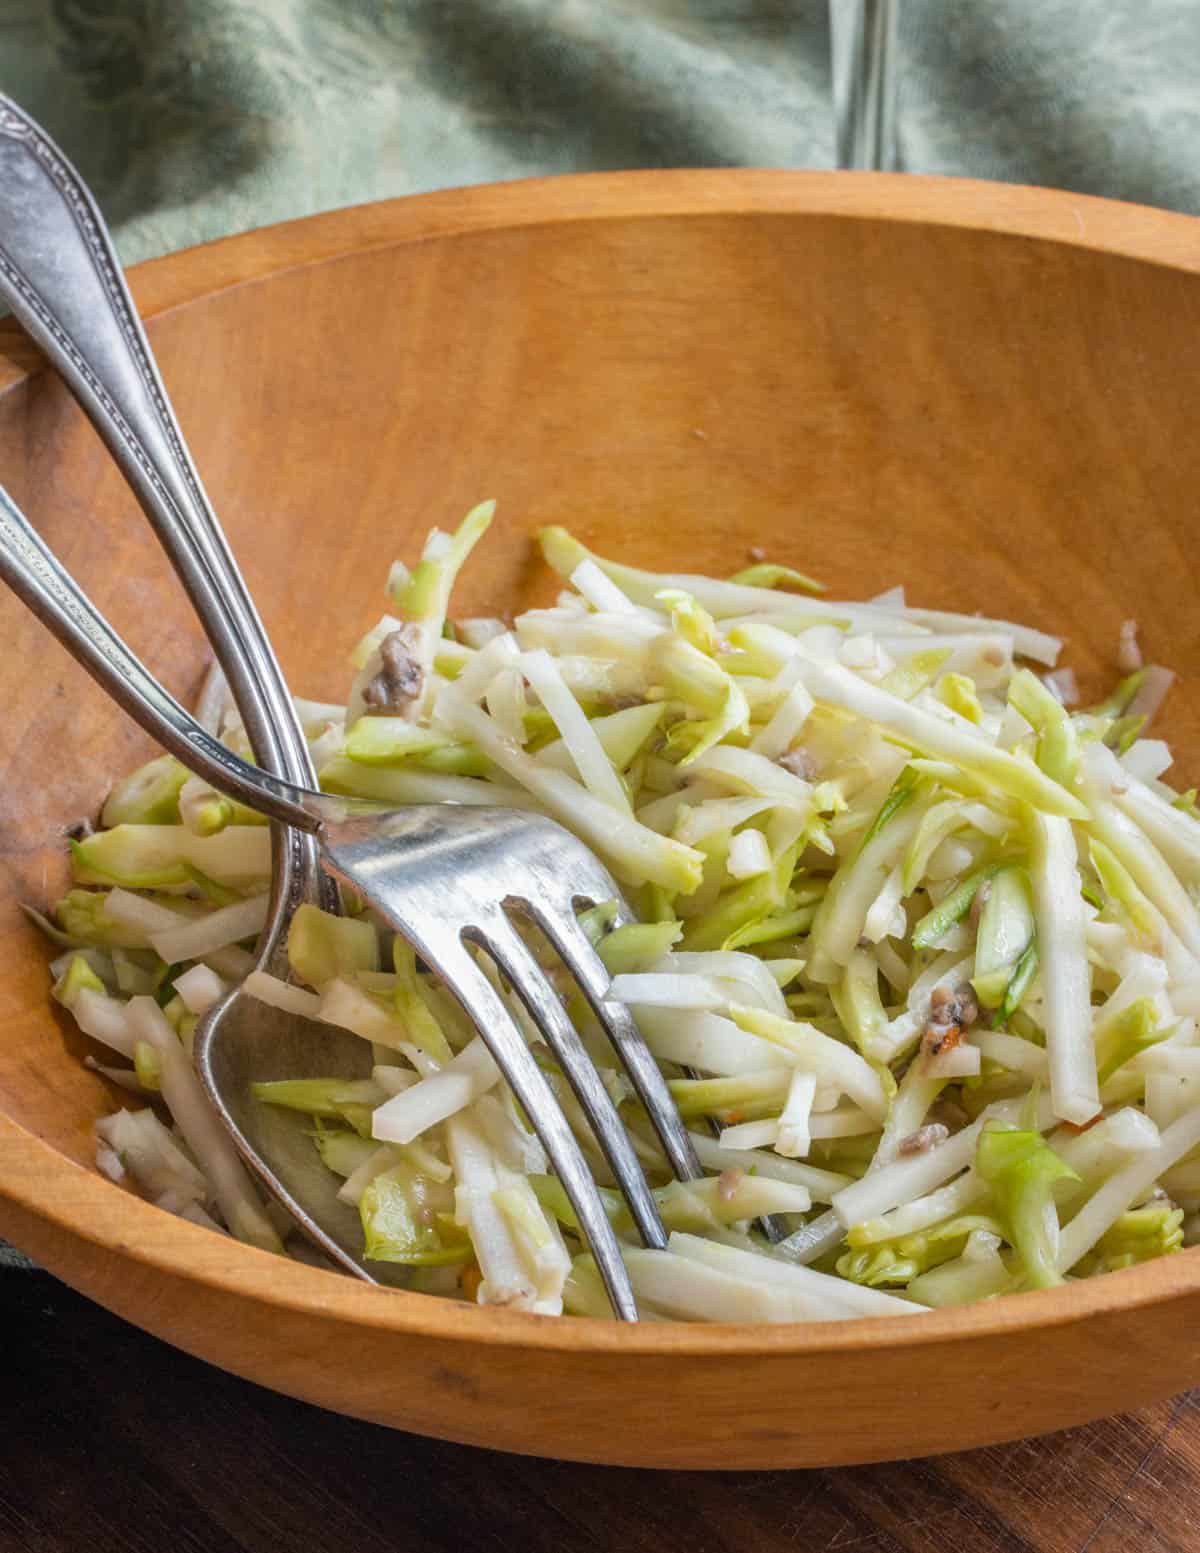 a wooden bowl of sliced vegetables with a green napkin, spoon and fork.